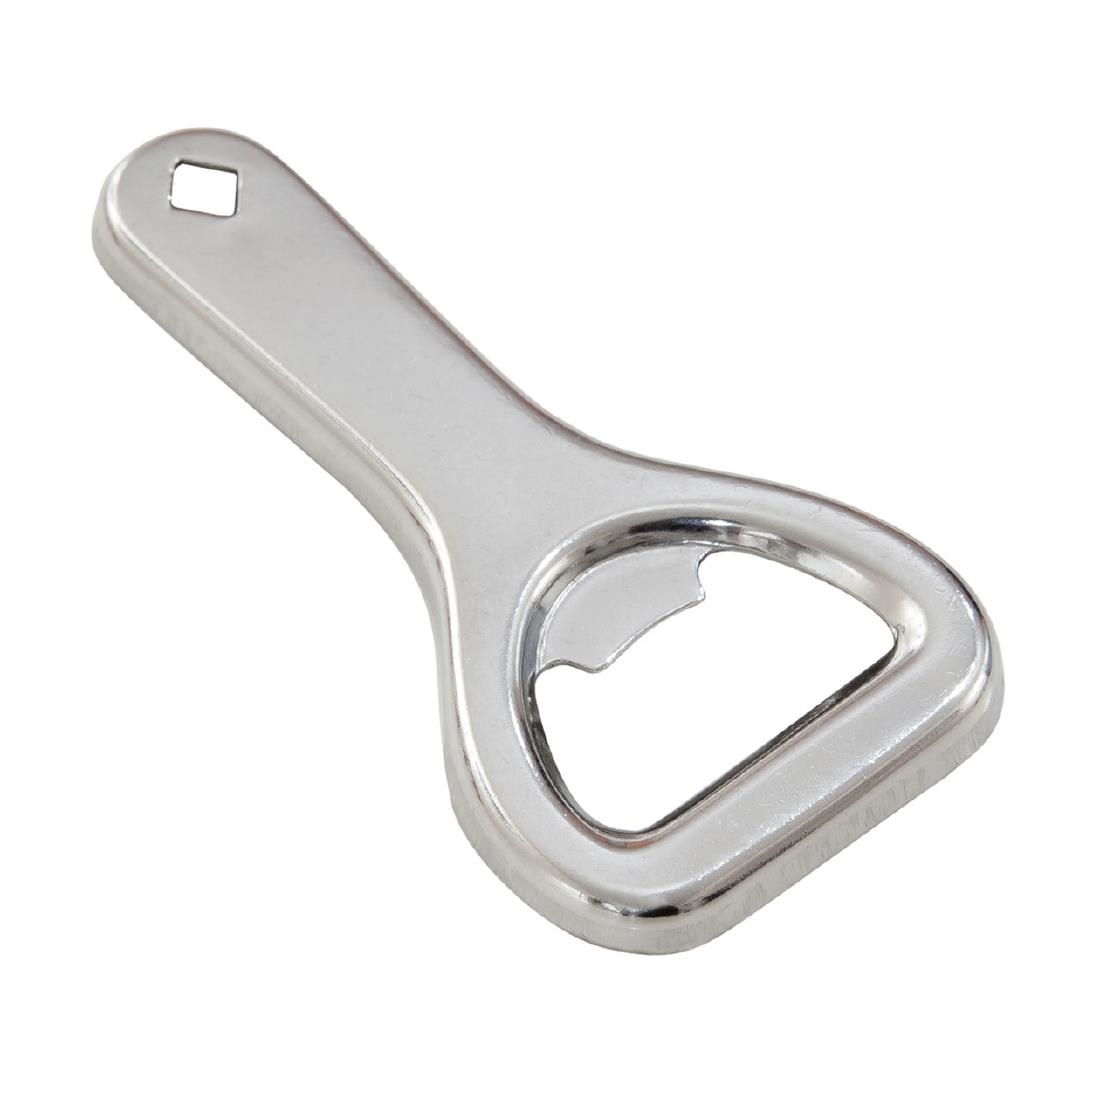 Beaumont Small Stainless Steel Hand Held Bottle Opener Pack of 10 (CZ489)